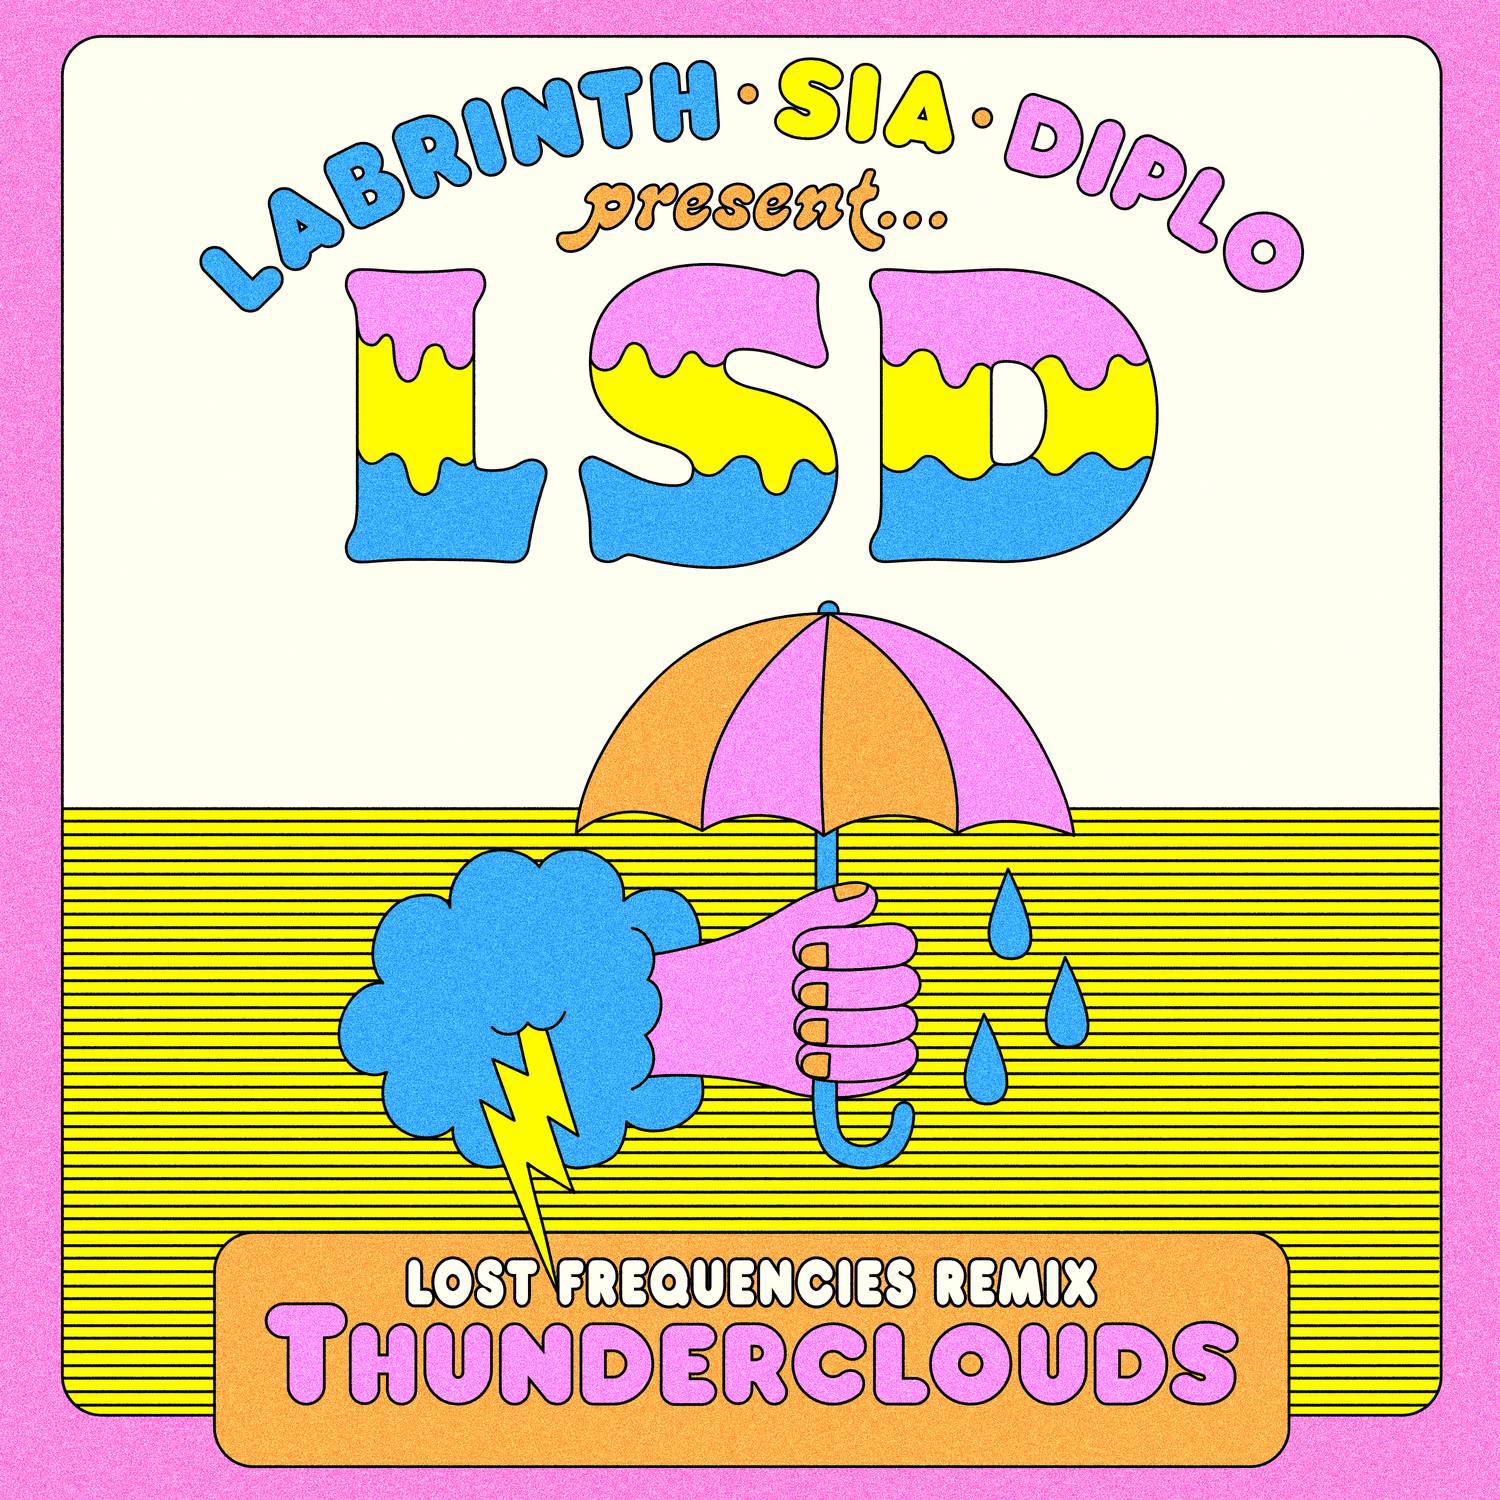 Thunderclouds (Lost Frequencies Remix)